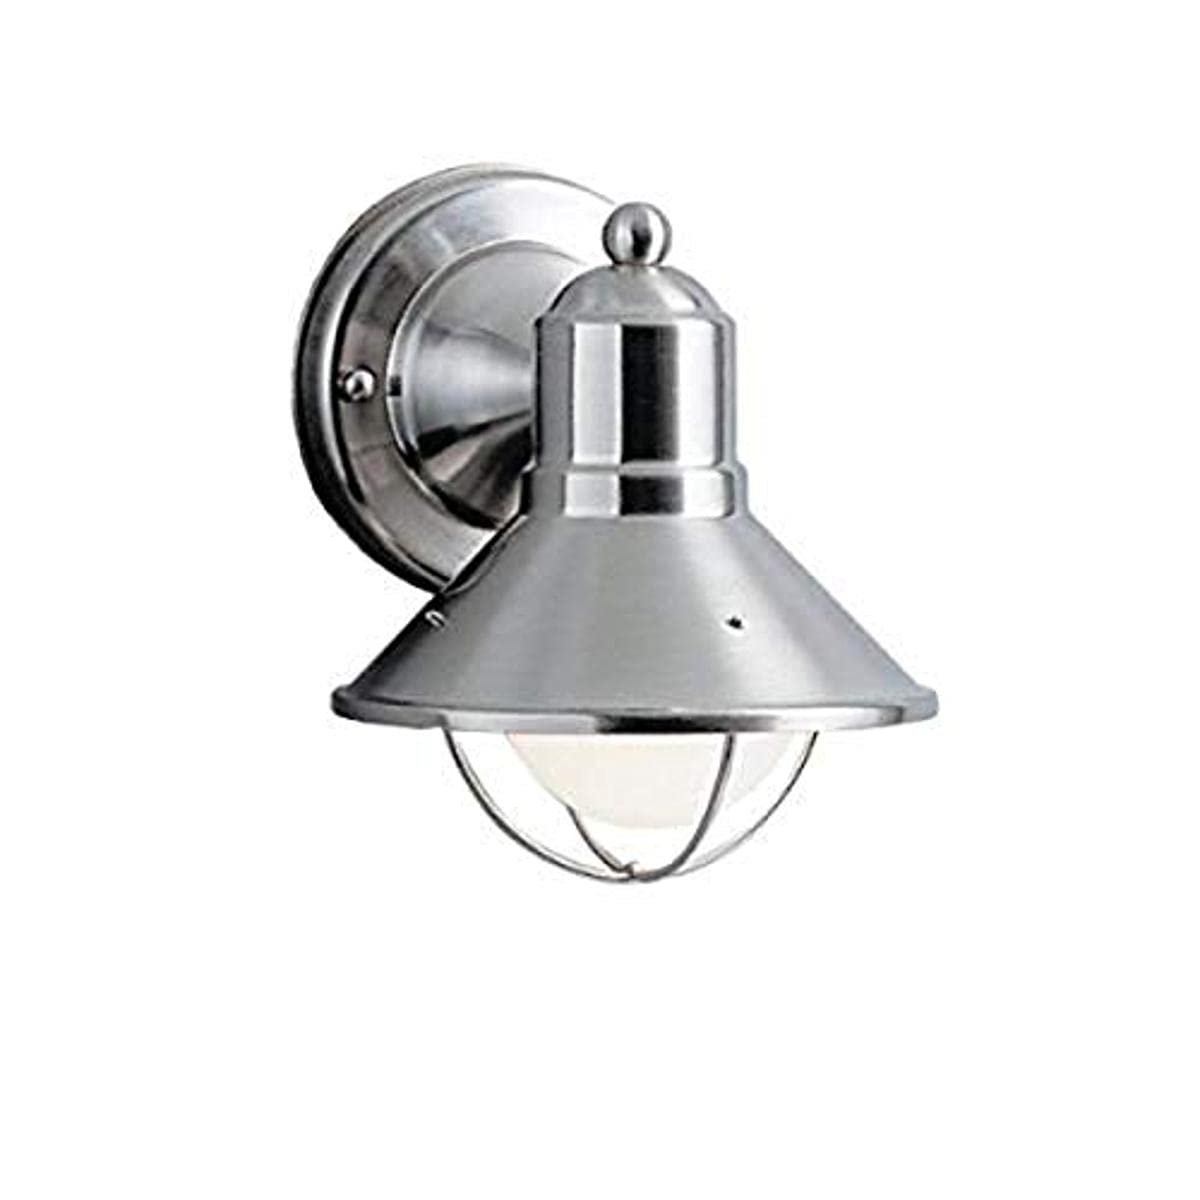 Kichler Lighting - One Light Outdoor Wall Mount - Outdoor Wall - Small - Seaside